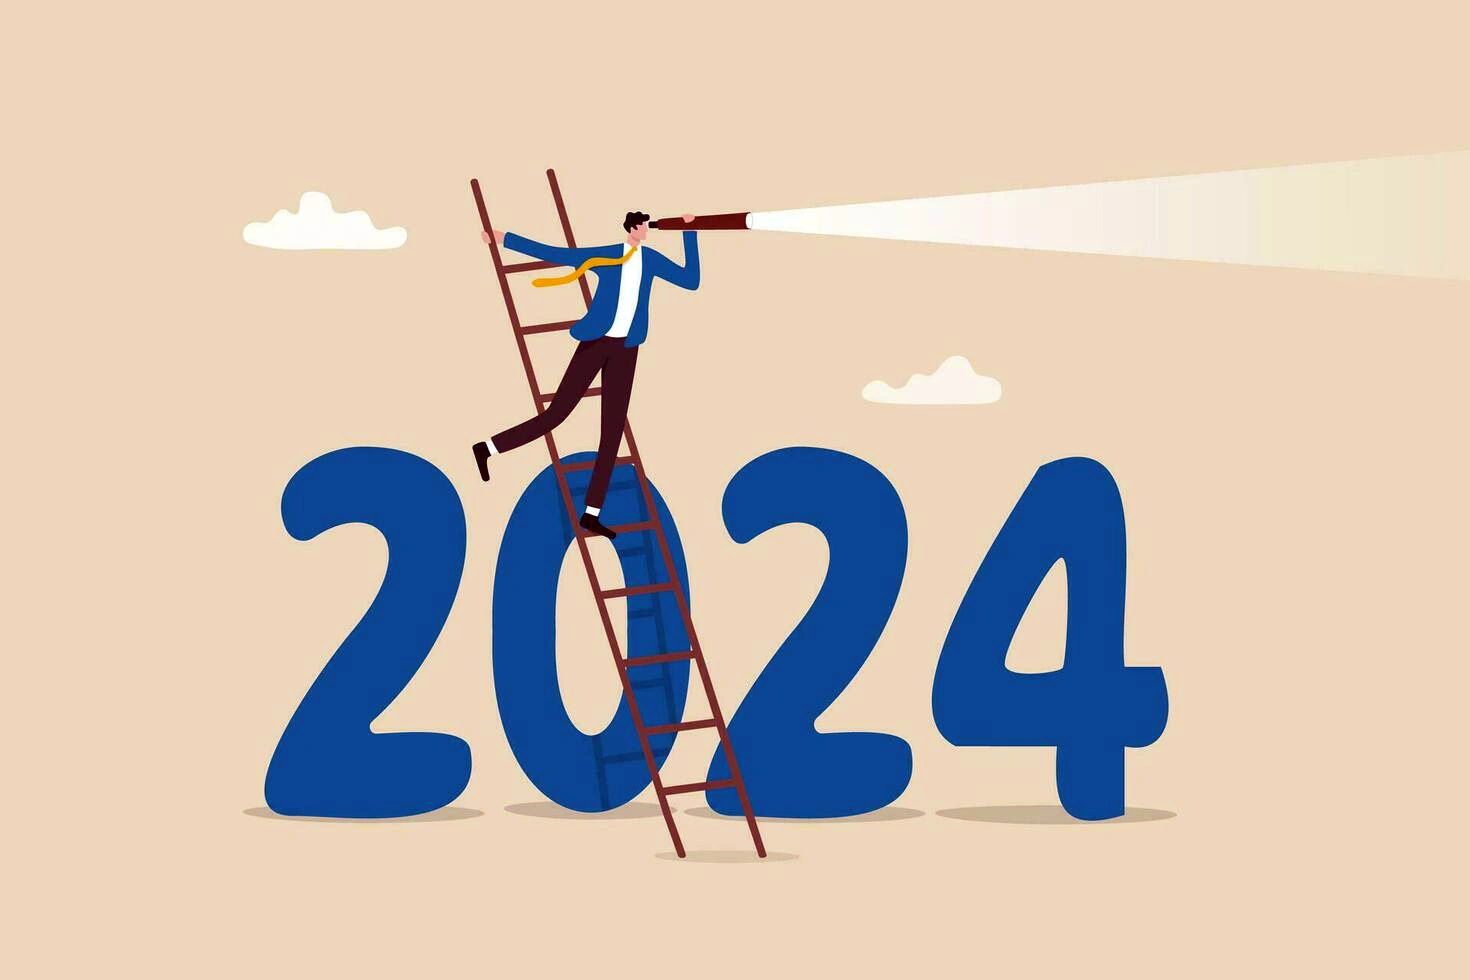 year 2024 business outlook forecast or plan ahead vision for future success new year goal or achievement company target or hope concept businessman climb up on year 2024 to see business outlook vector